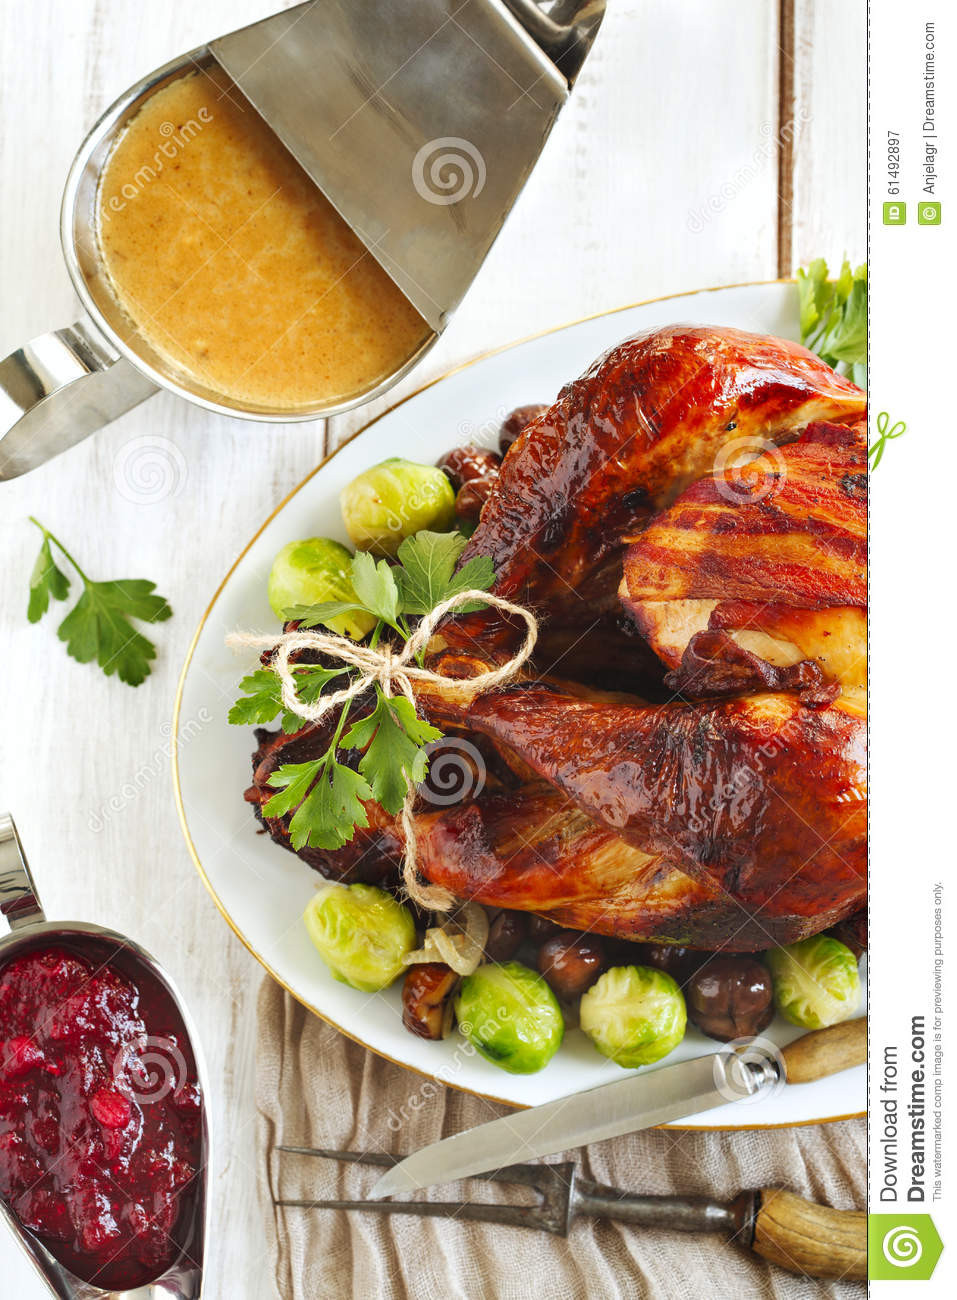 Prepared Turkey For Thanksgiving
 Roasted Turkey With Bacon And Garnished With Chestnuts And